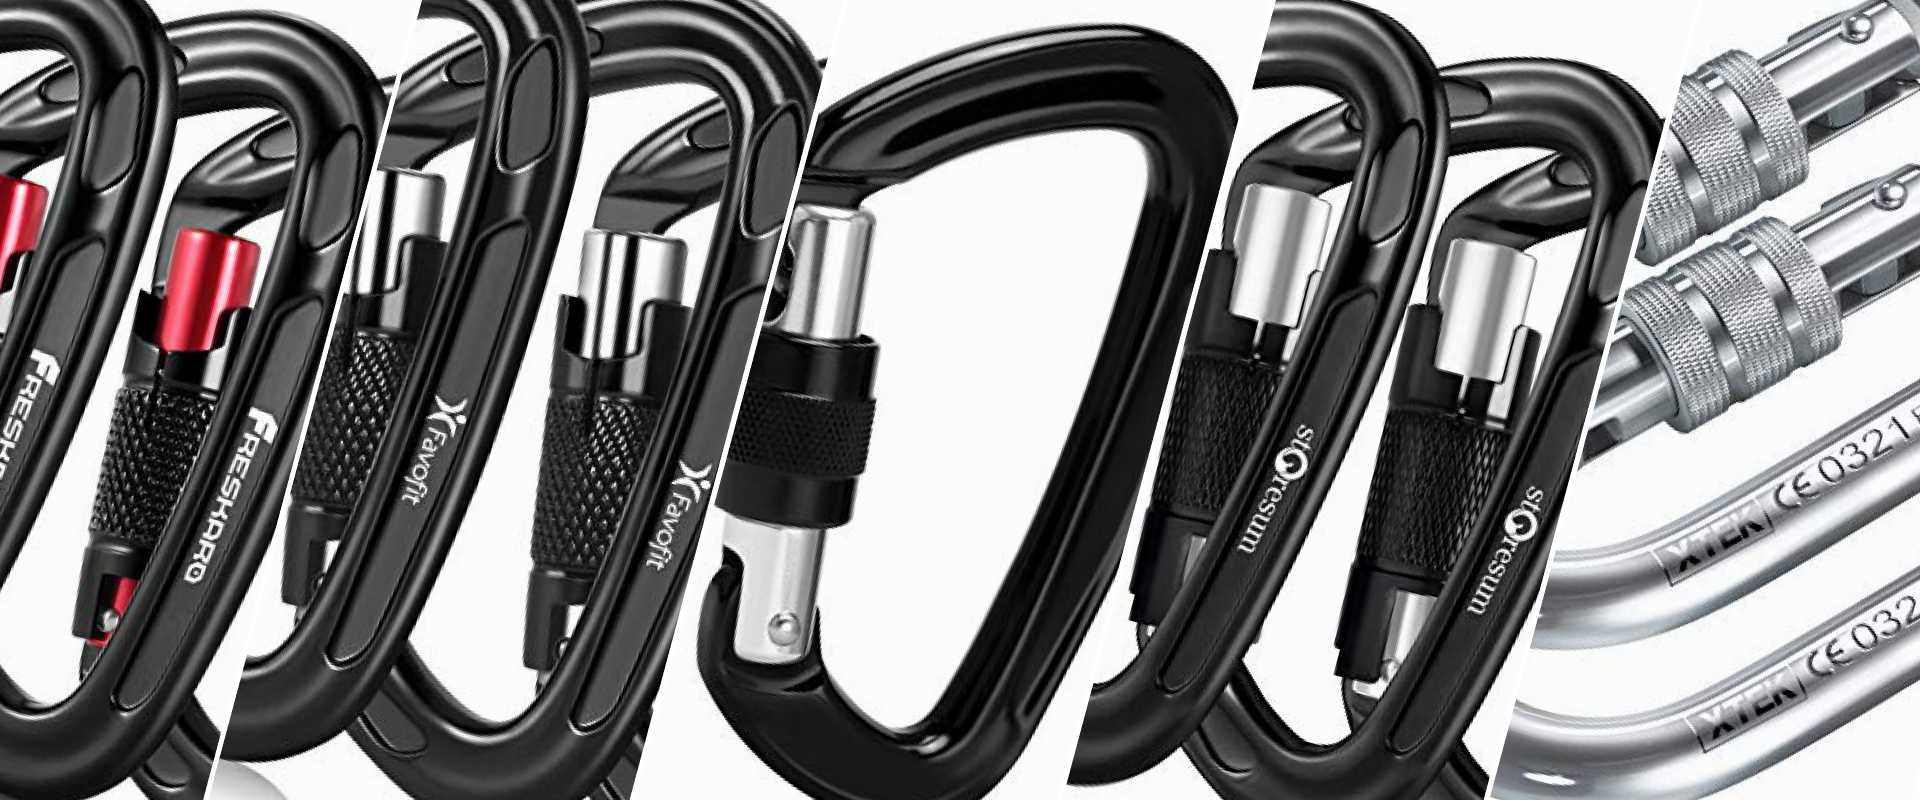 Ultralight 24kN Locking Carabiner Screw Gate with CE UIAA Climbing Backpacking 